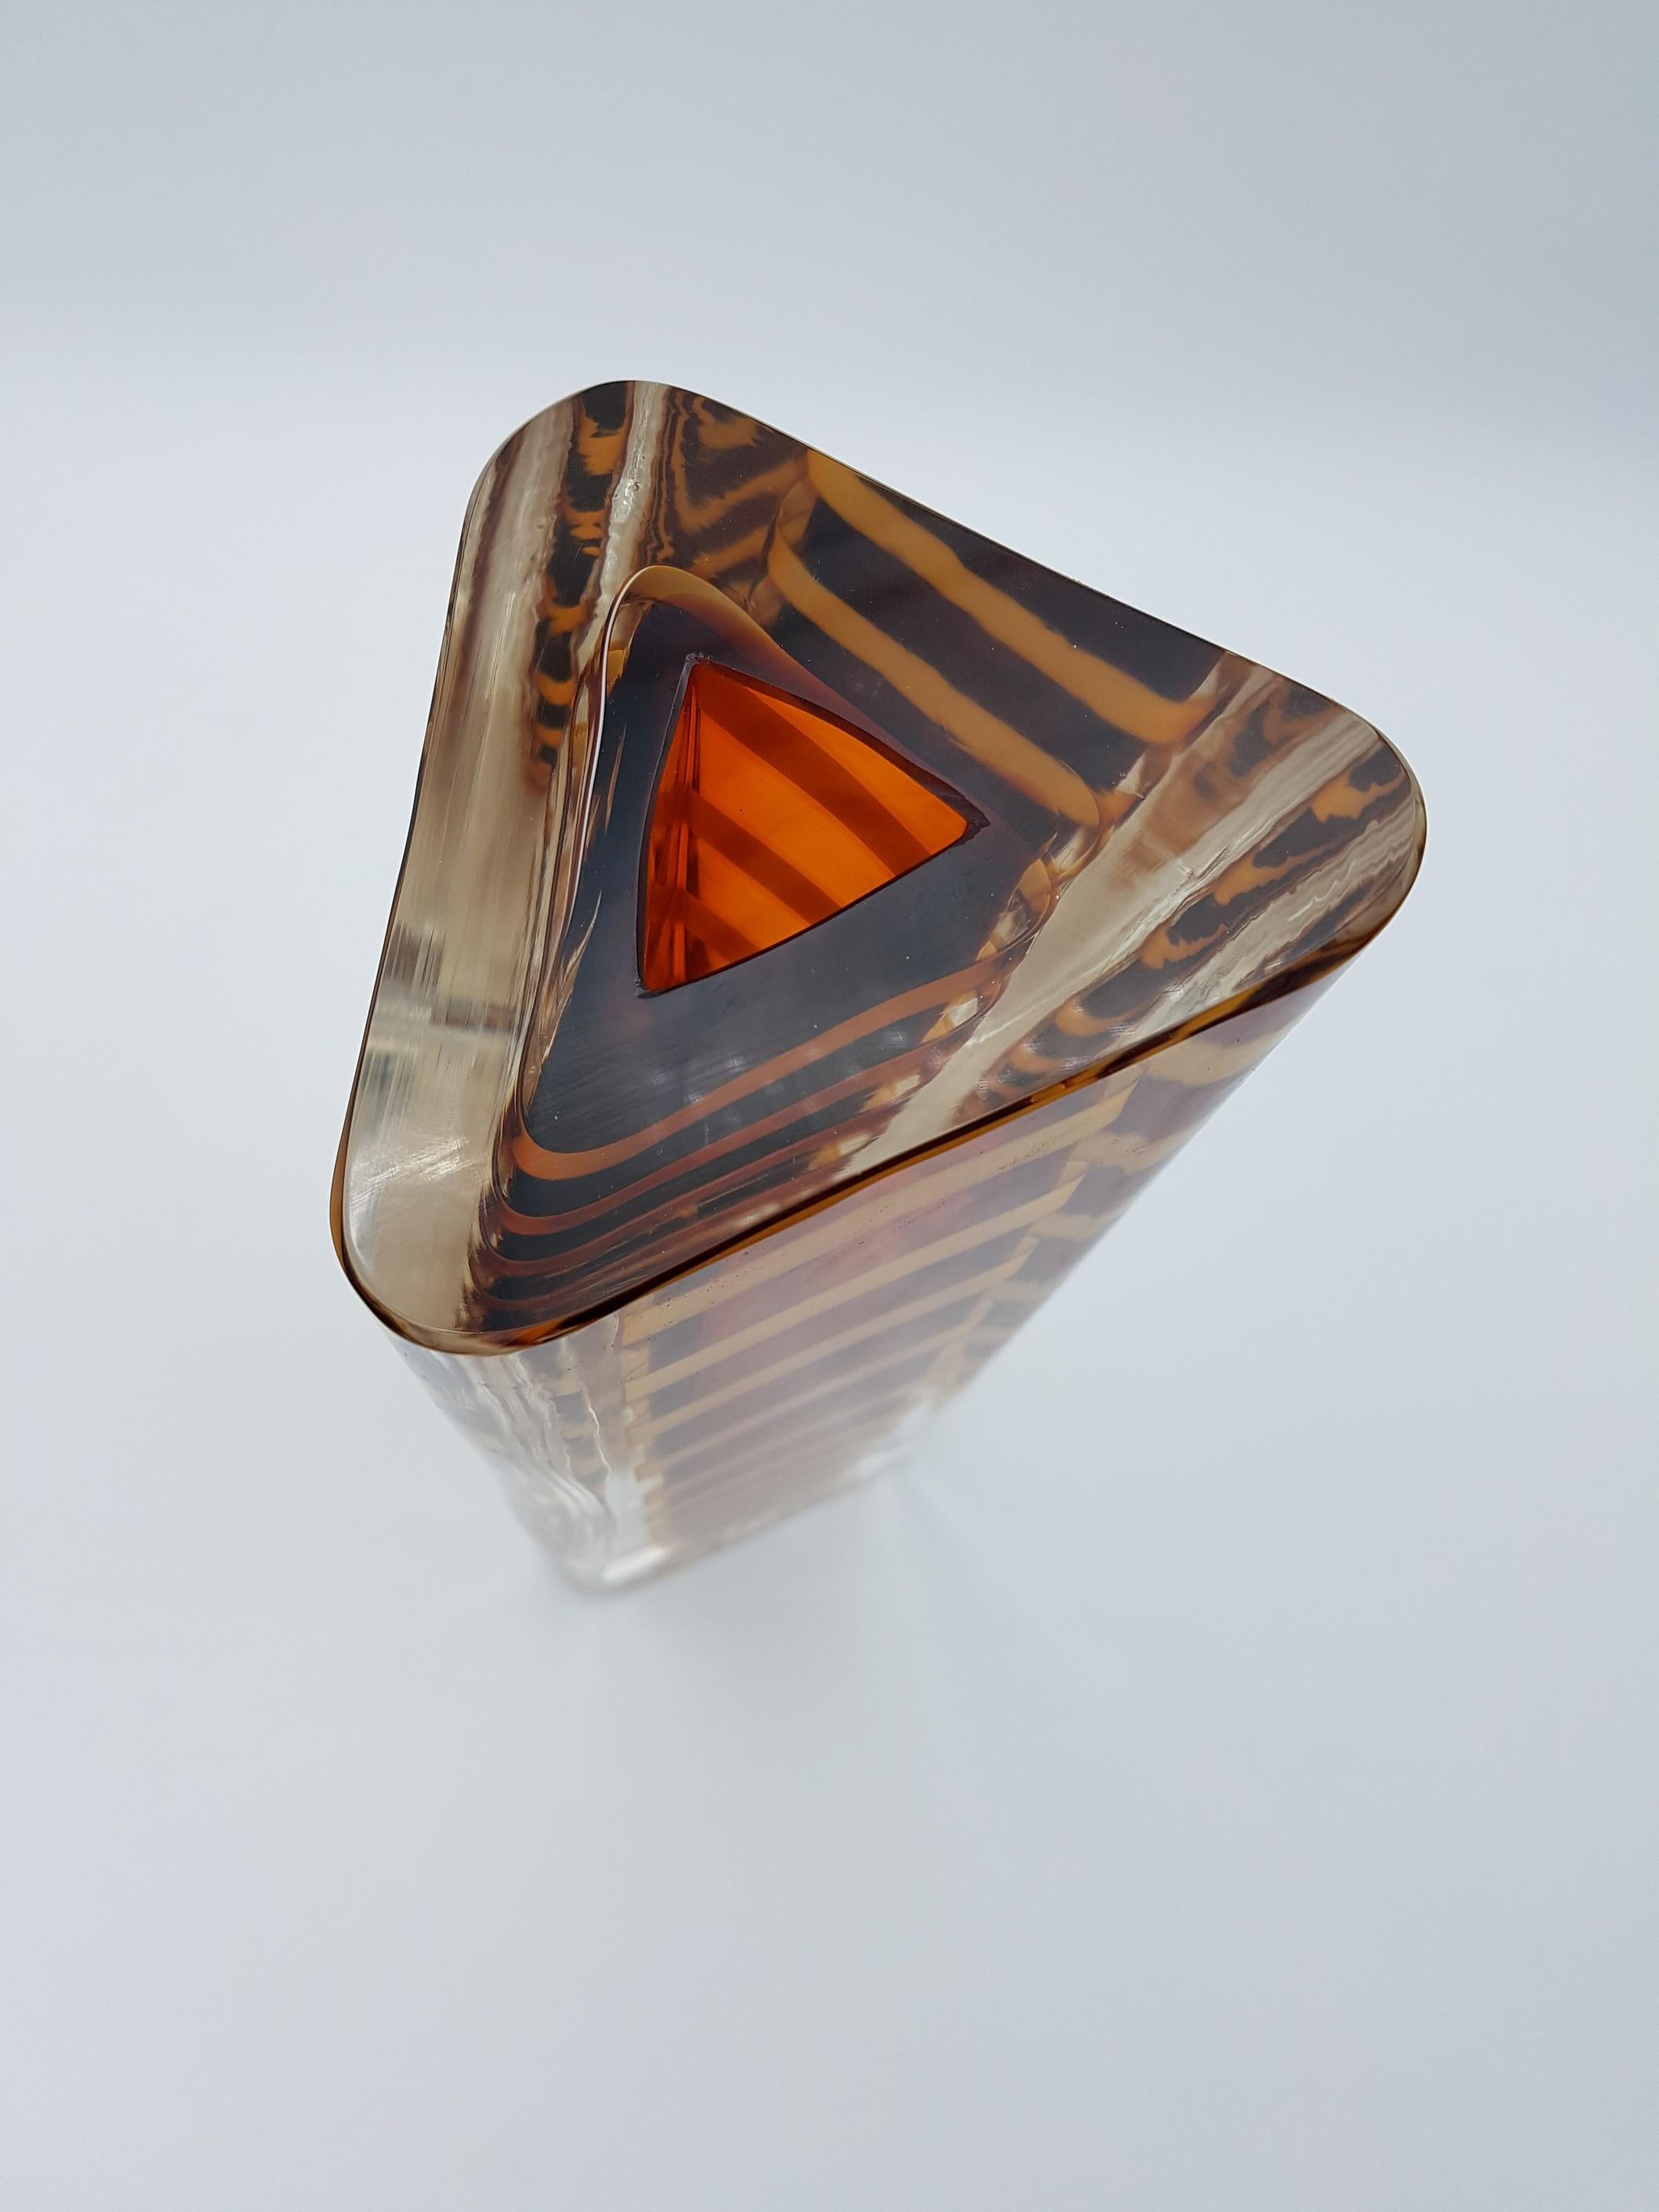 Contemporary Murano Glass Vase by Cenedese, Amber and Yellow Color, late 1990s For Sale 1